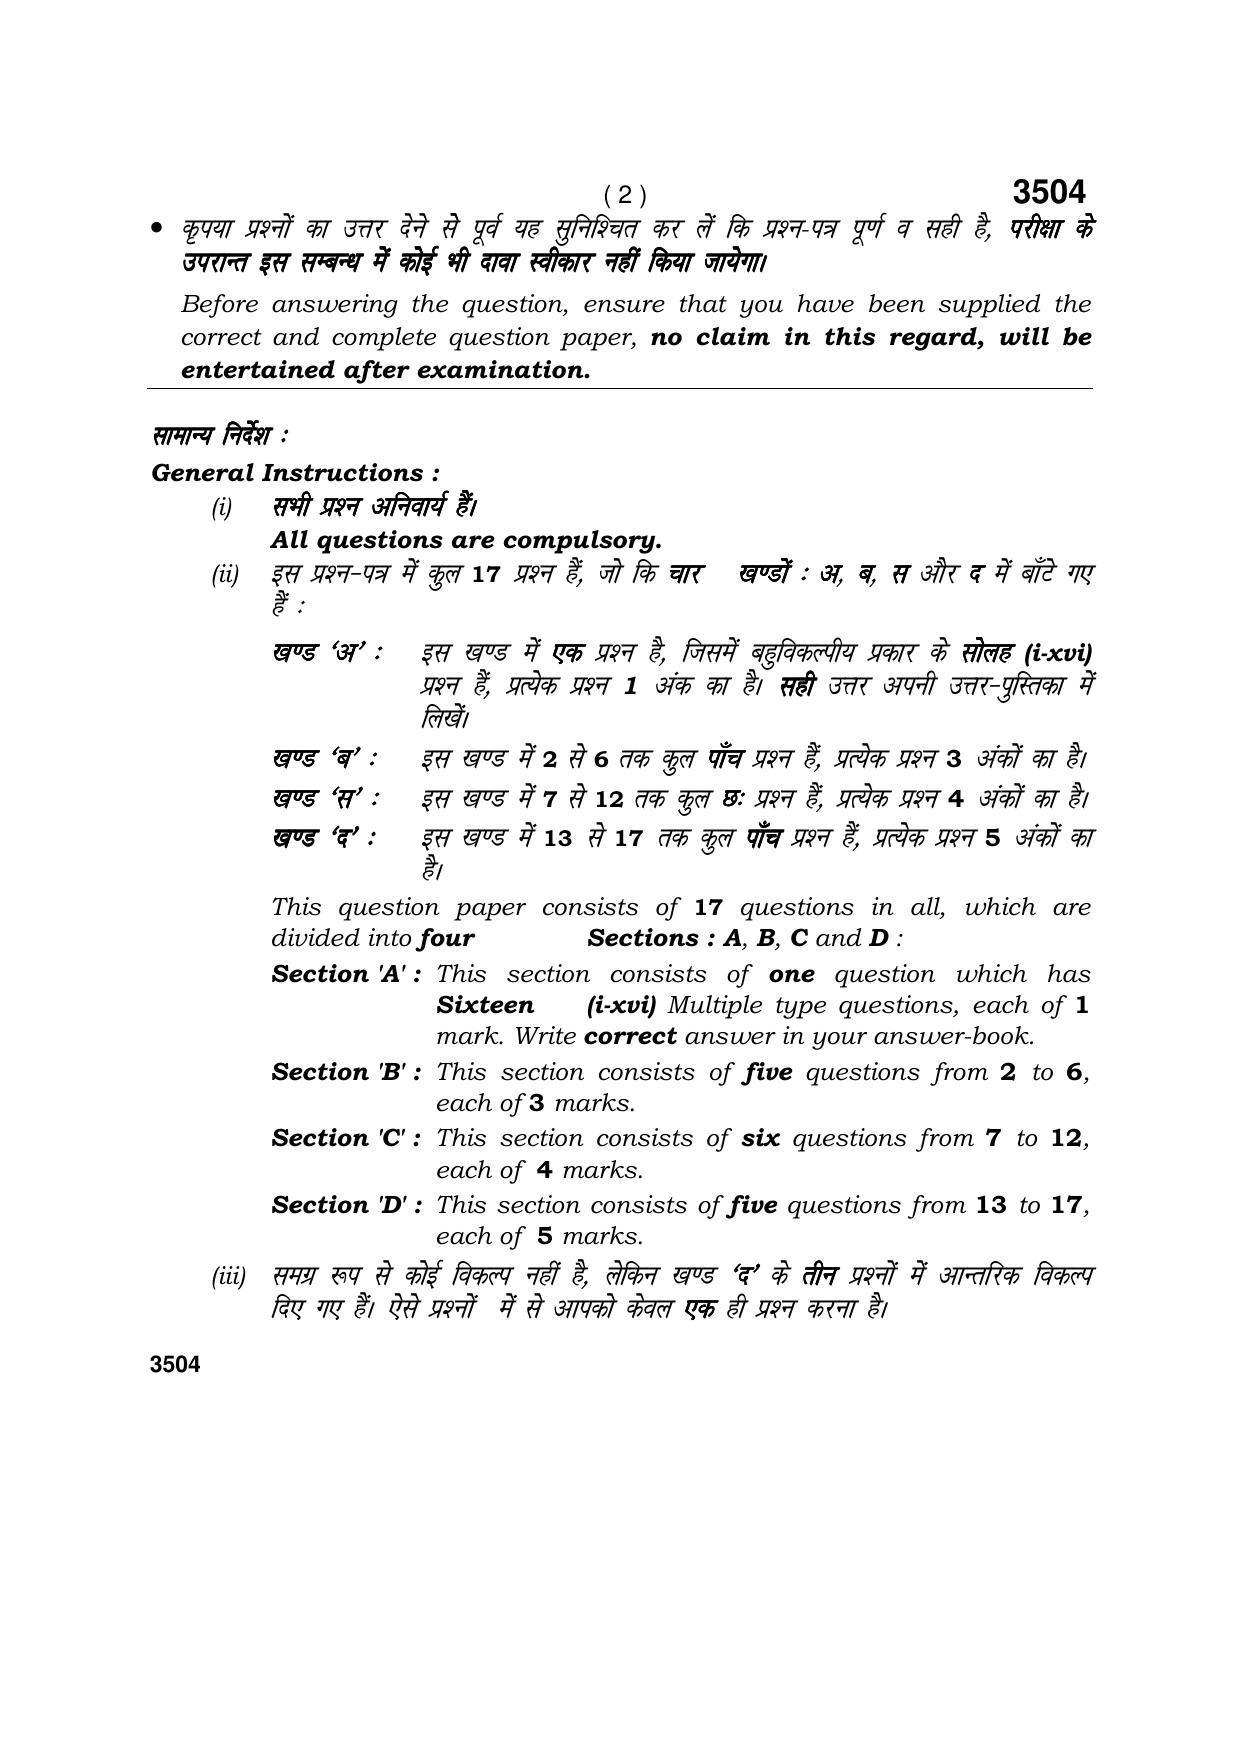 Haryana Board HBSE Class 10 Mathematics (Blind c) 2018 Question Paper - Page 2